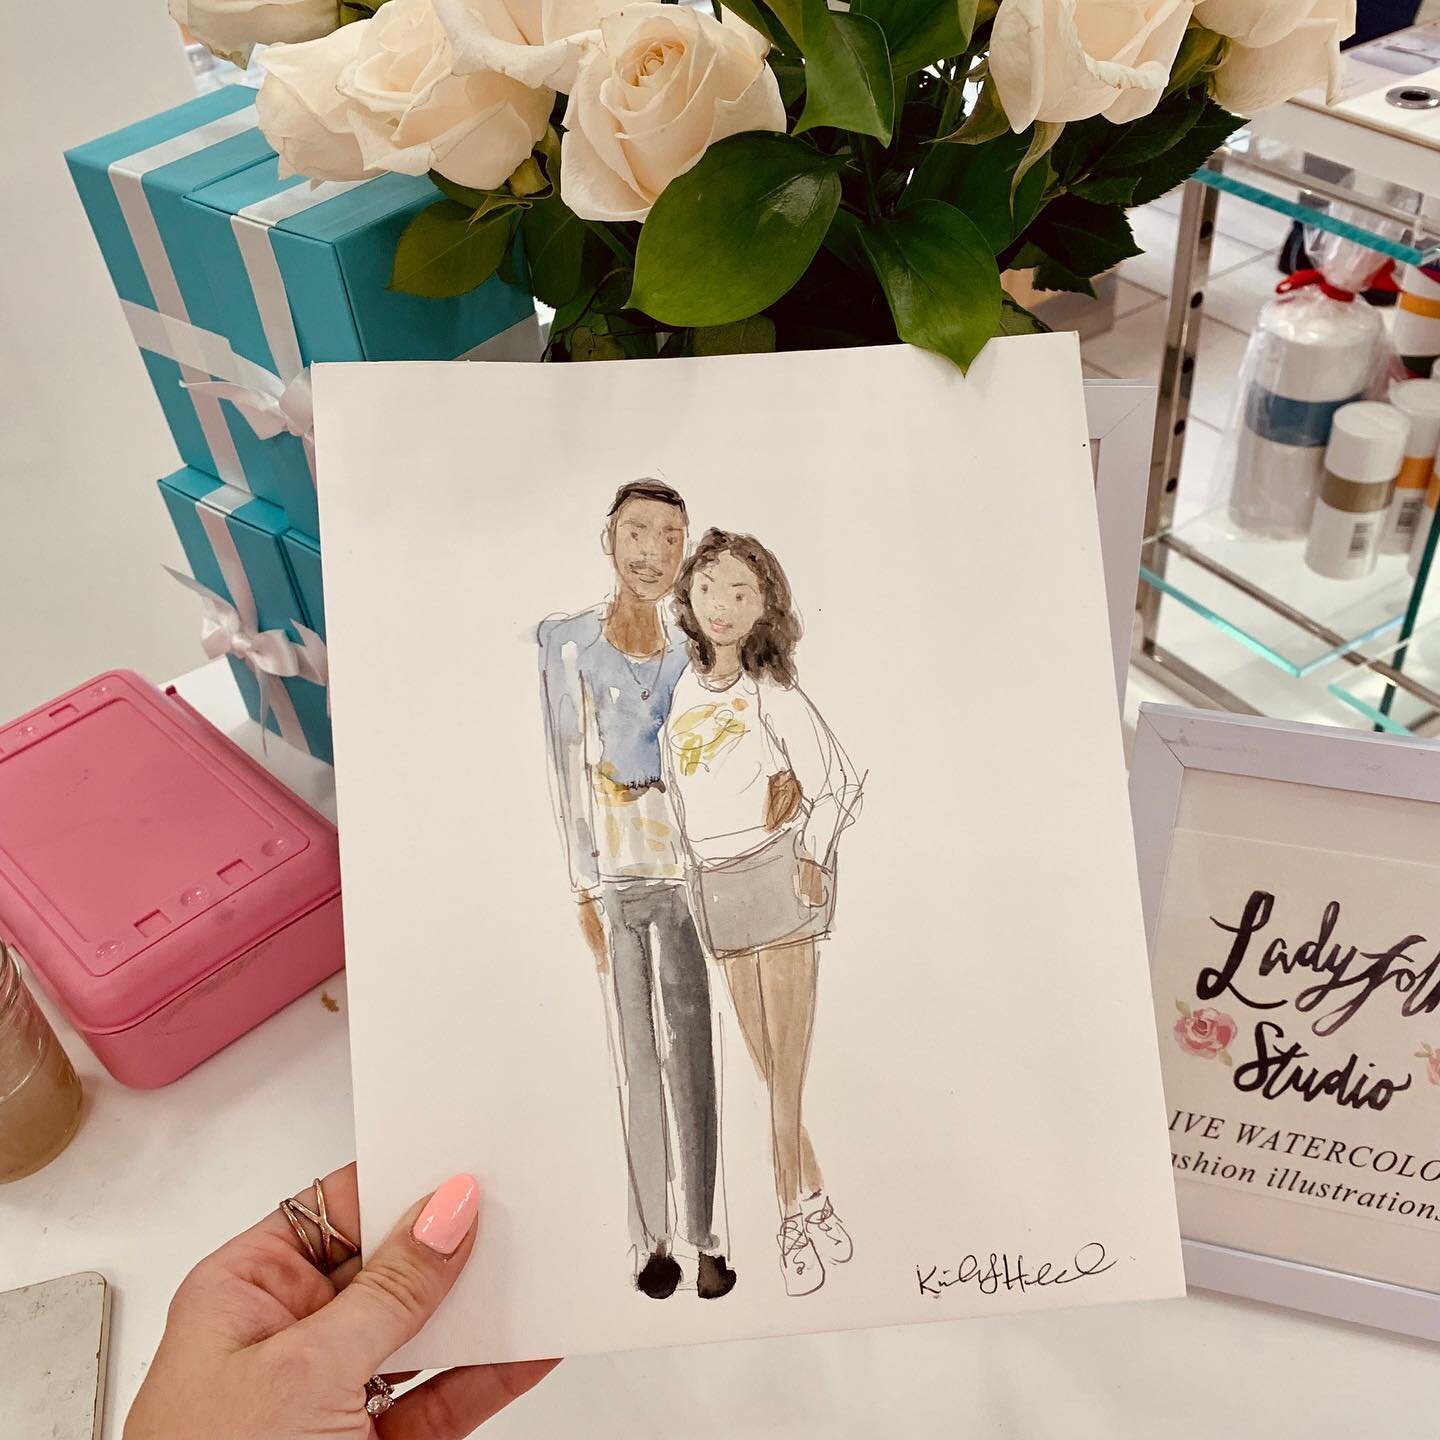 Friday is for lovers💗 YES! I can draw couples too, super cute take home favor and entertainment for your next party or event. Contact me for rates, currently booking now through summer. DM or email kimberly@ladyfolkstudio.com
#liveart #fashionevent 